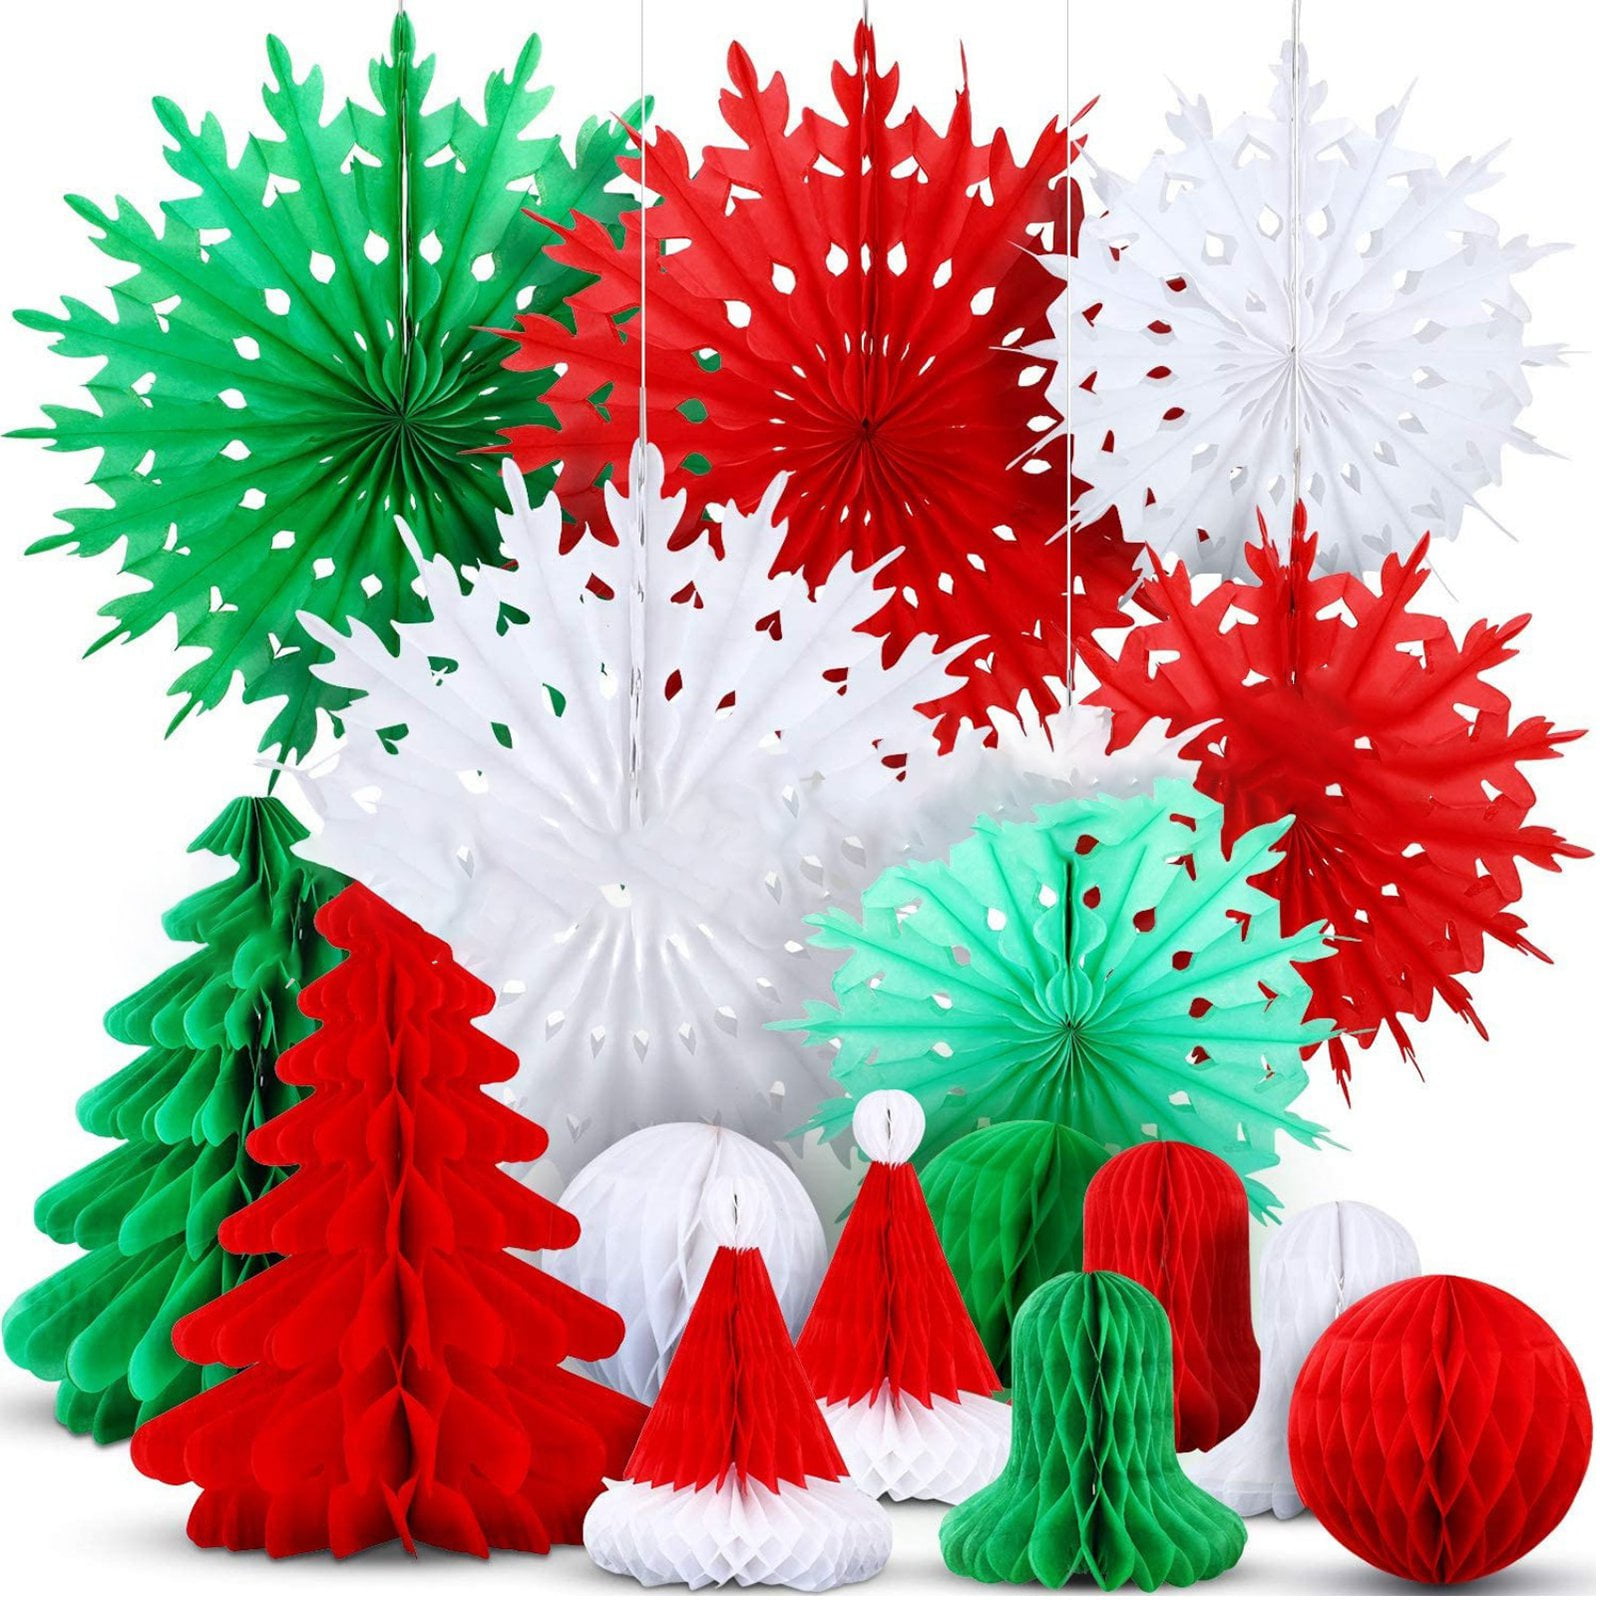 Yyeselk Christmas Honeycomb Decorations Assorted 3D Paper Honeycomb  Decoration Hanging Honeycomb Tree Ball Bell Hat Snowflake for Christmas  Party